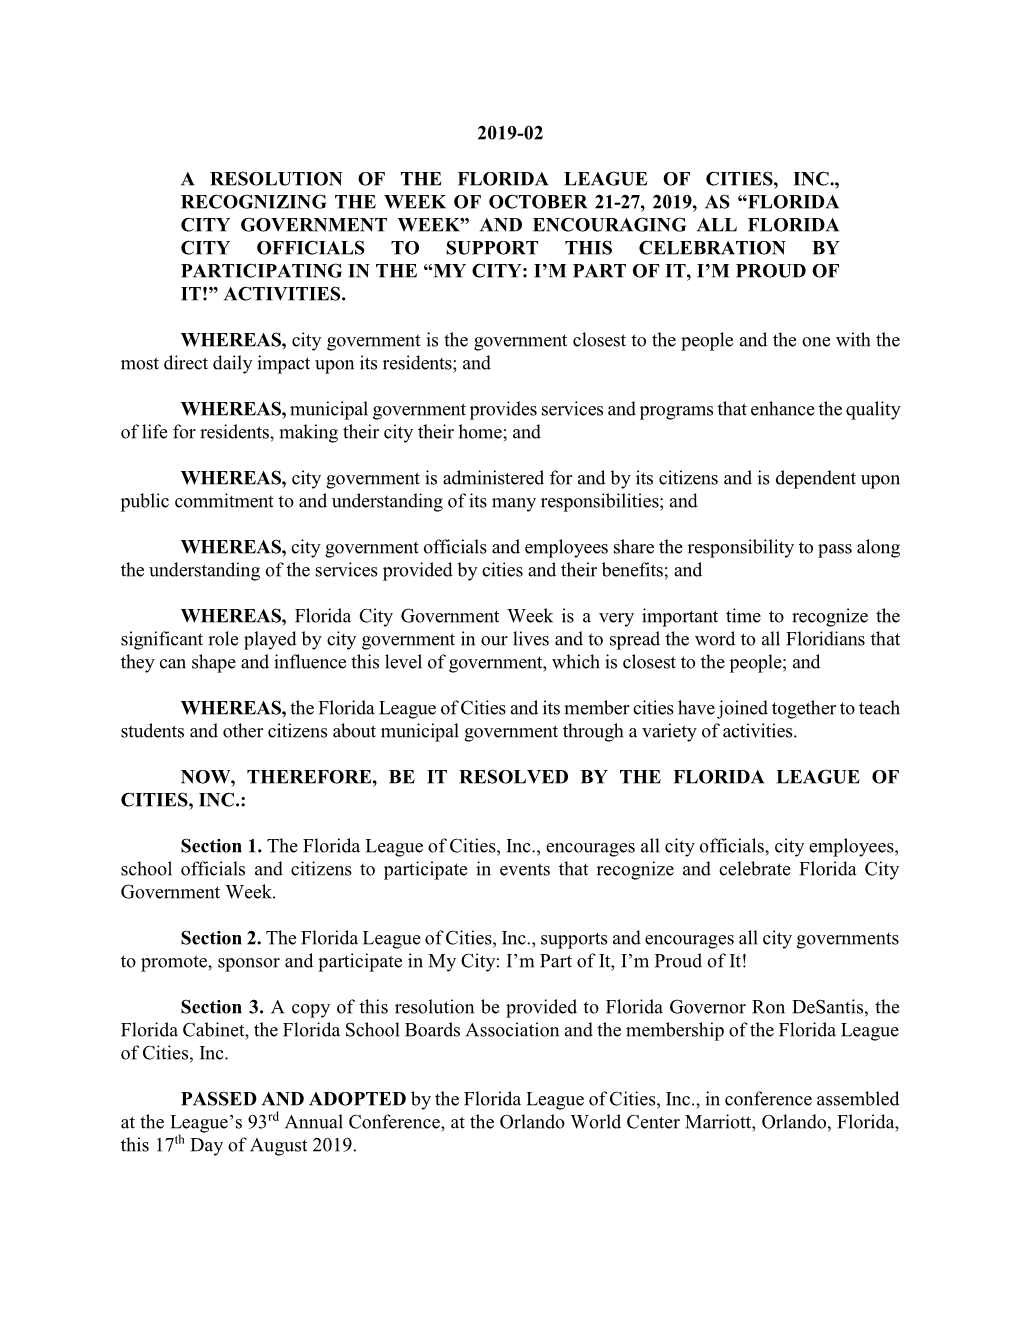 2019-02 a Resolution of the Florida League of Cities, Inc